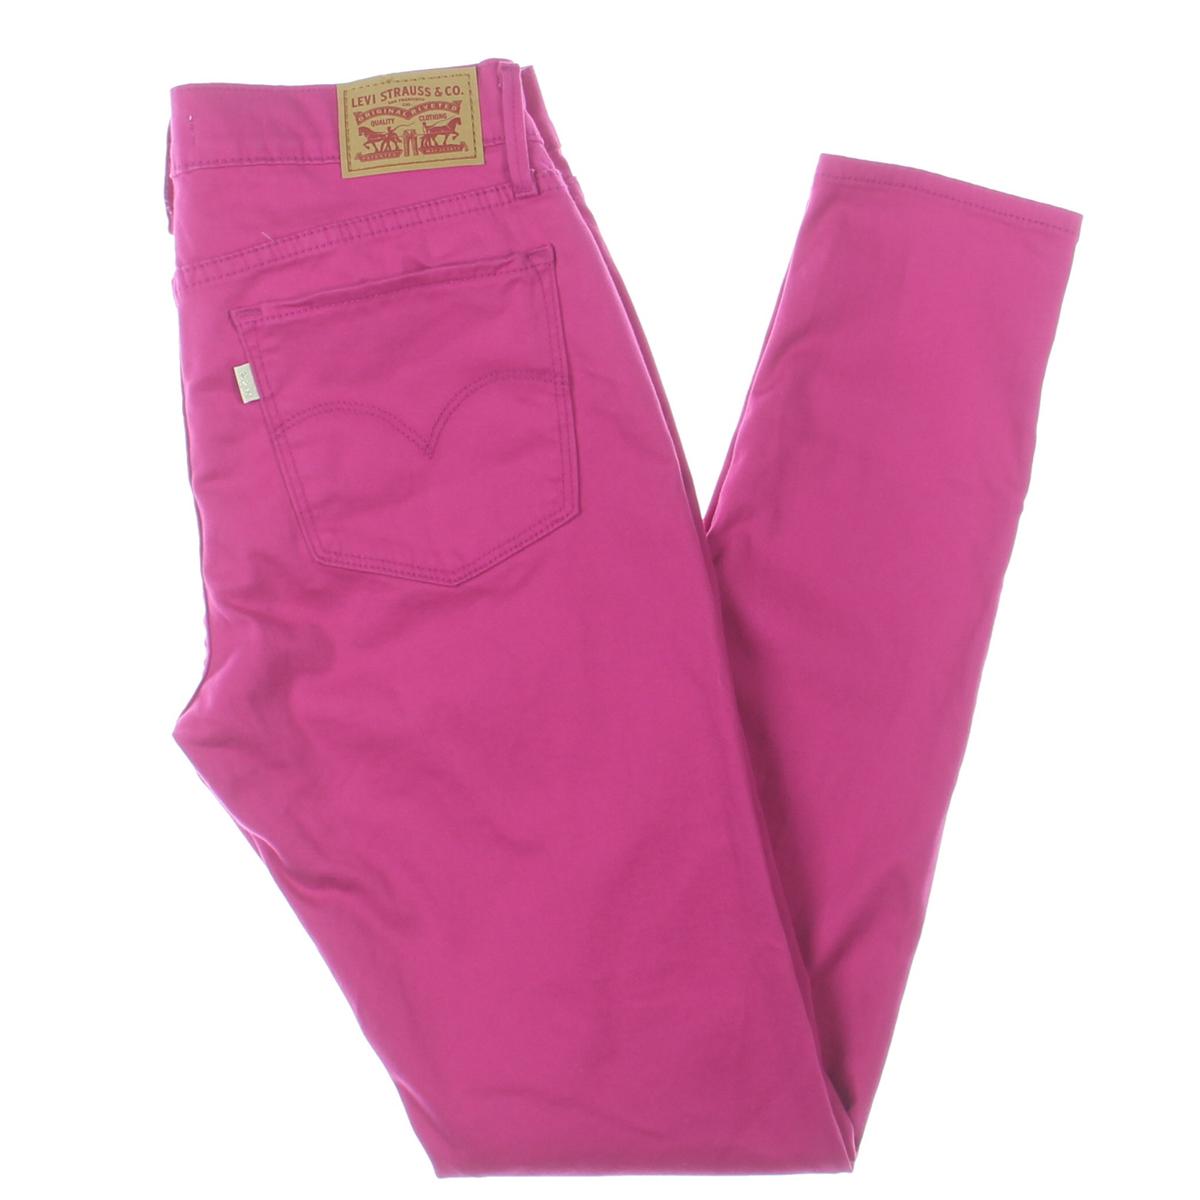 Levi's Womens 710 Pink Stretch Slimming Colored Skinny Jeans 2 26 BHFO ...